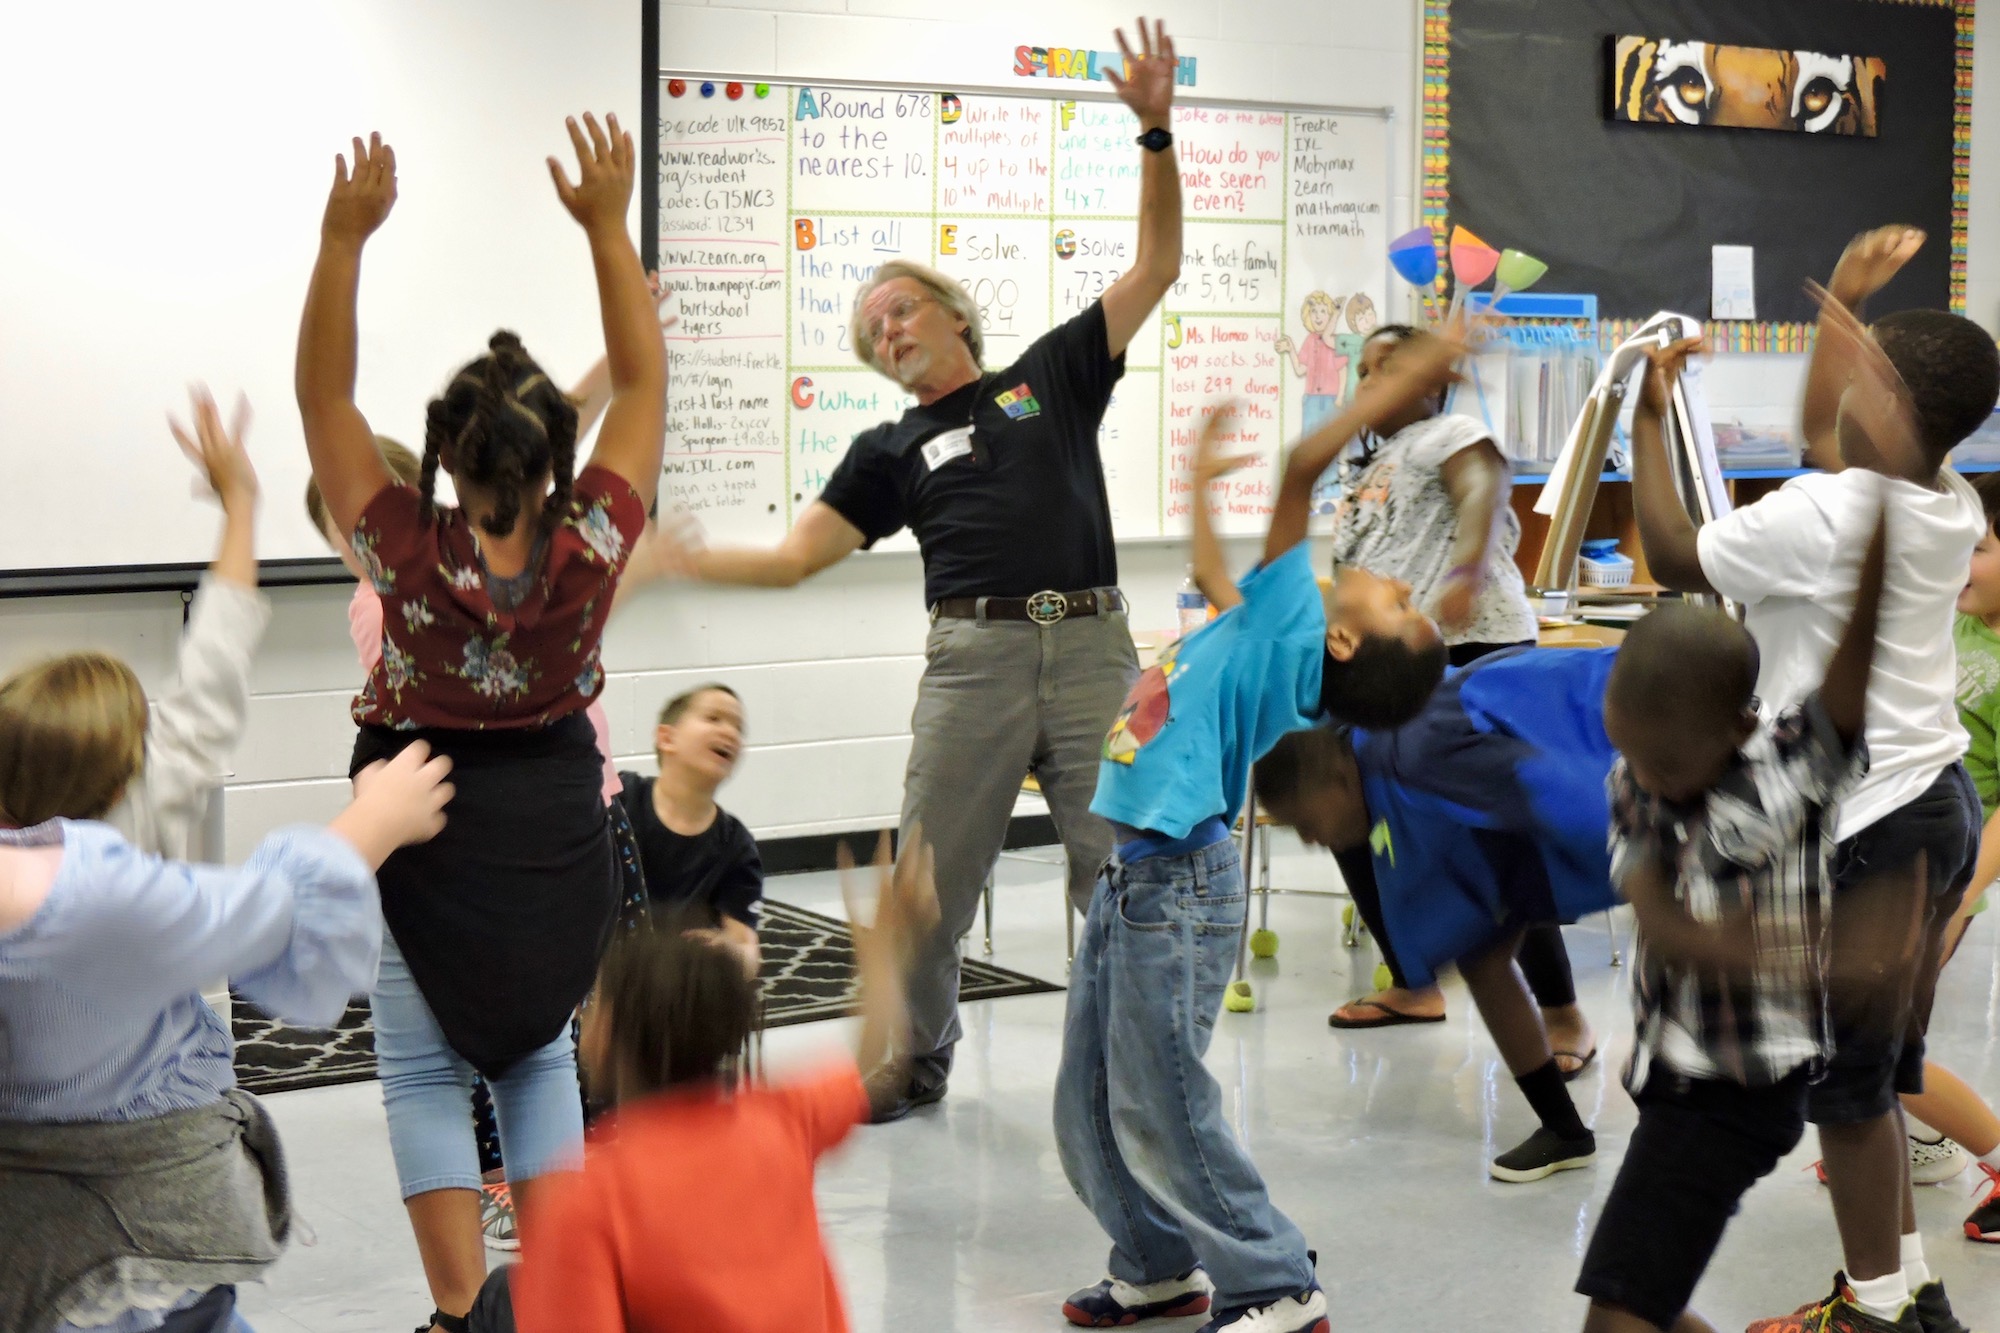 Randy Barron, a John F. Kennedy Center for the Performing Arts teaching artist, led workshops last October as part of the CECA-CMCSS Partners in Education program.